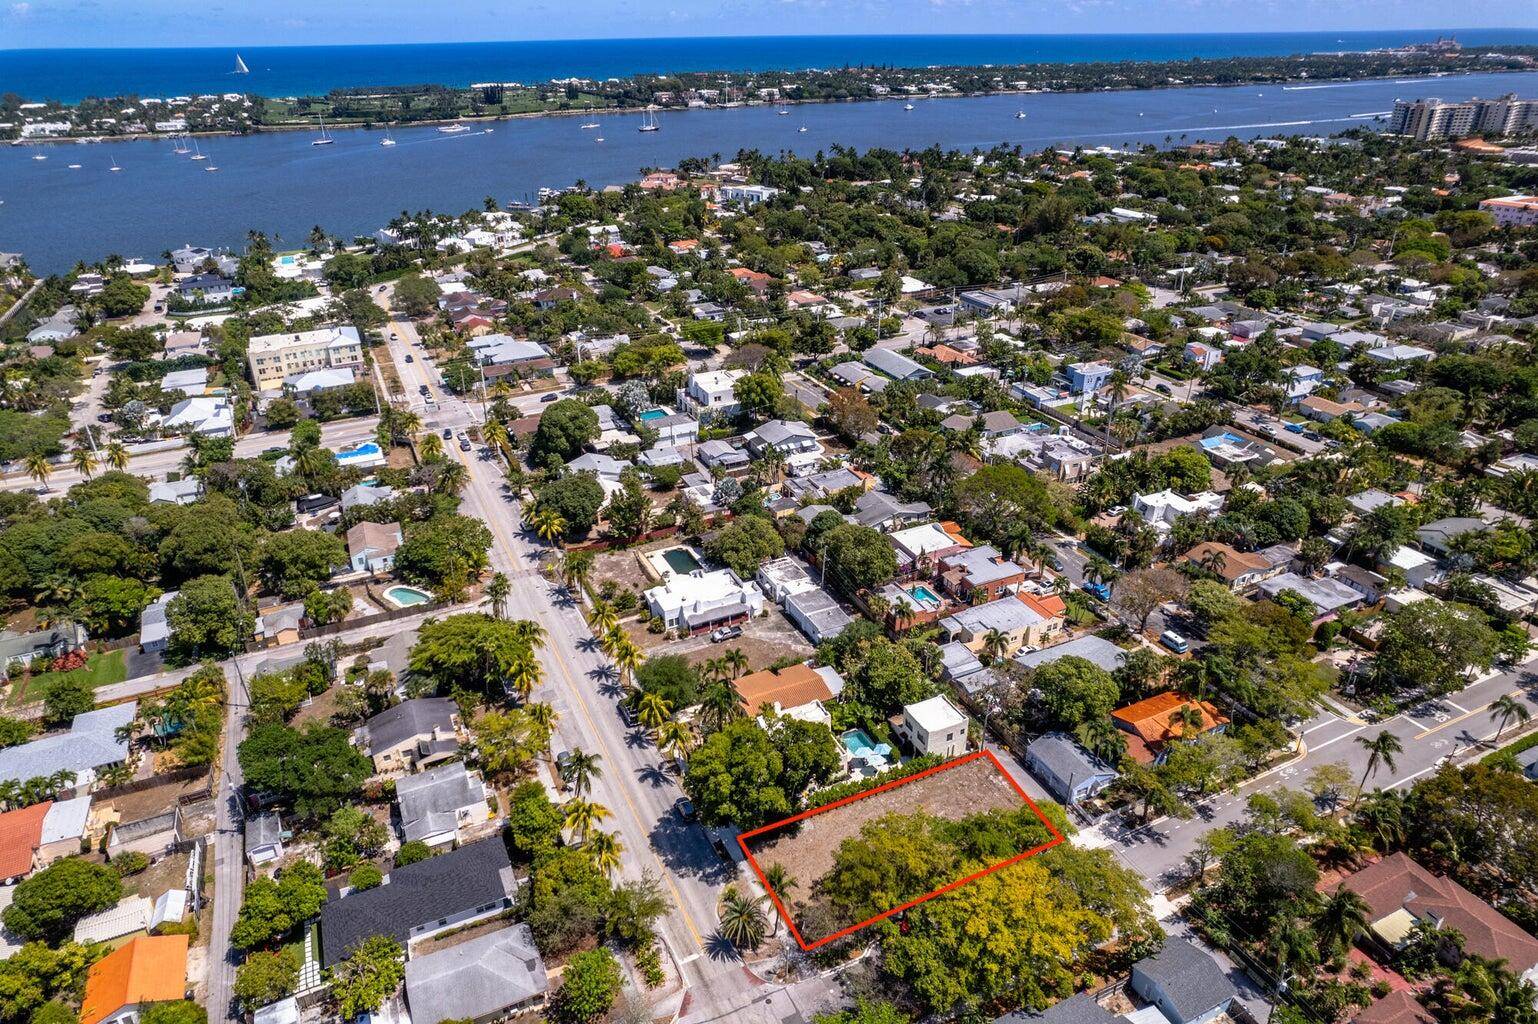 Incredible opportunity to build and design the perfect home in one of the fastest growing neighborhoods in West Palm Beach.